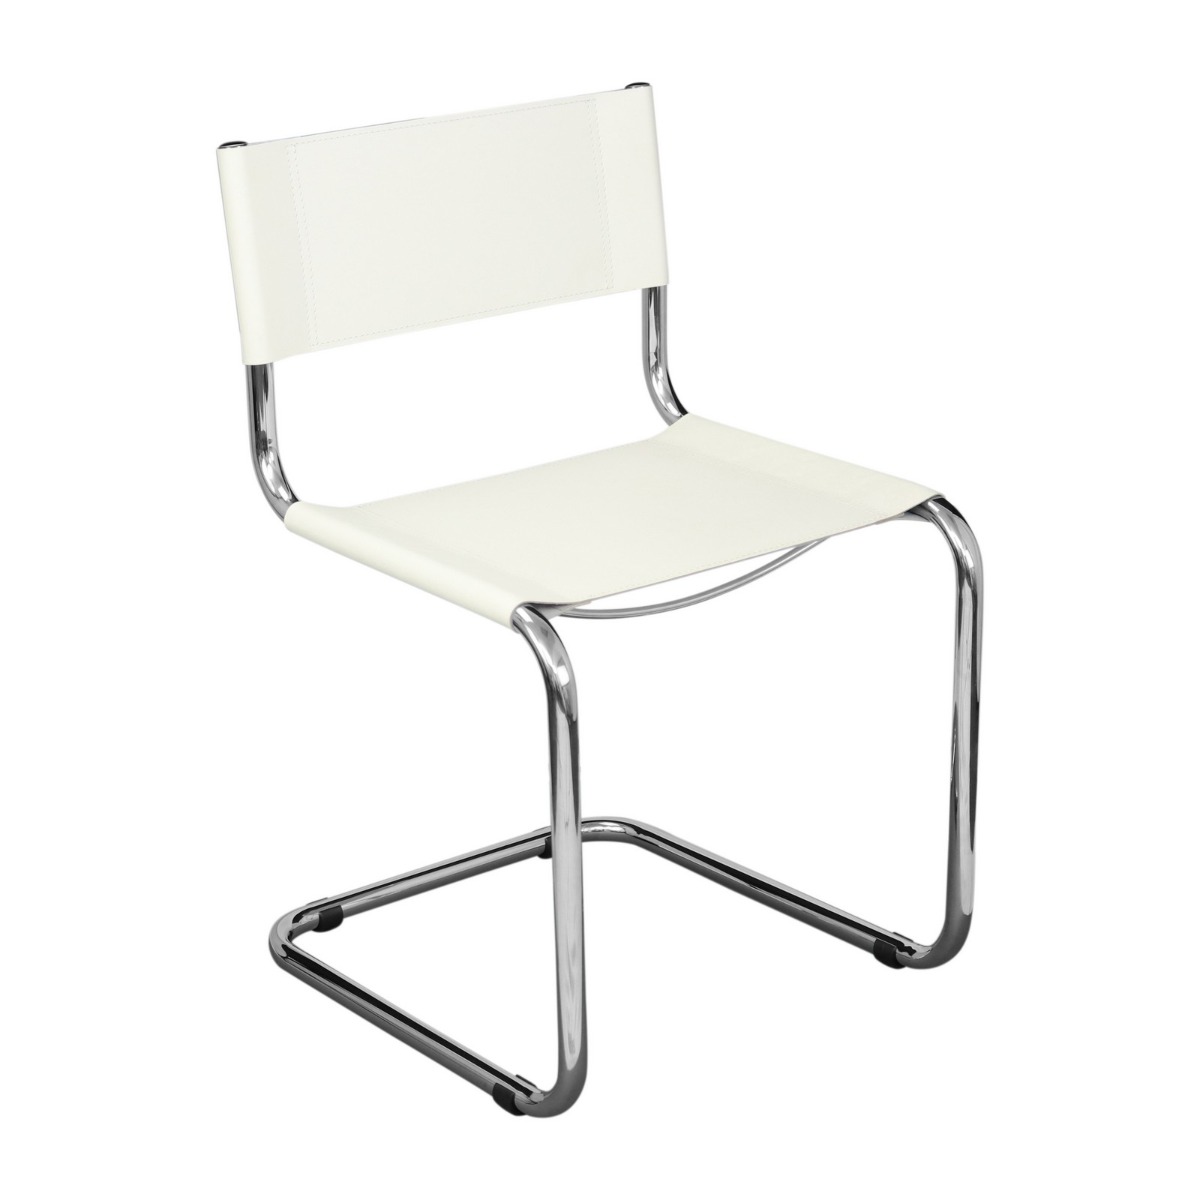 Breuer Chair Company Mart Stam Italia Cantilever Side Chair in Chrome and White Faux Leather